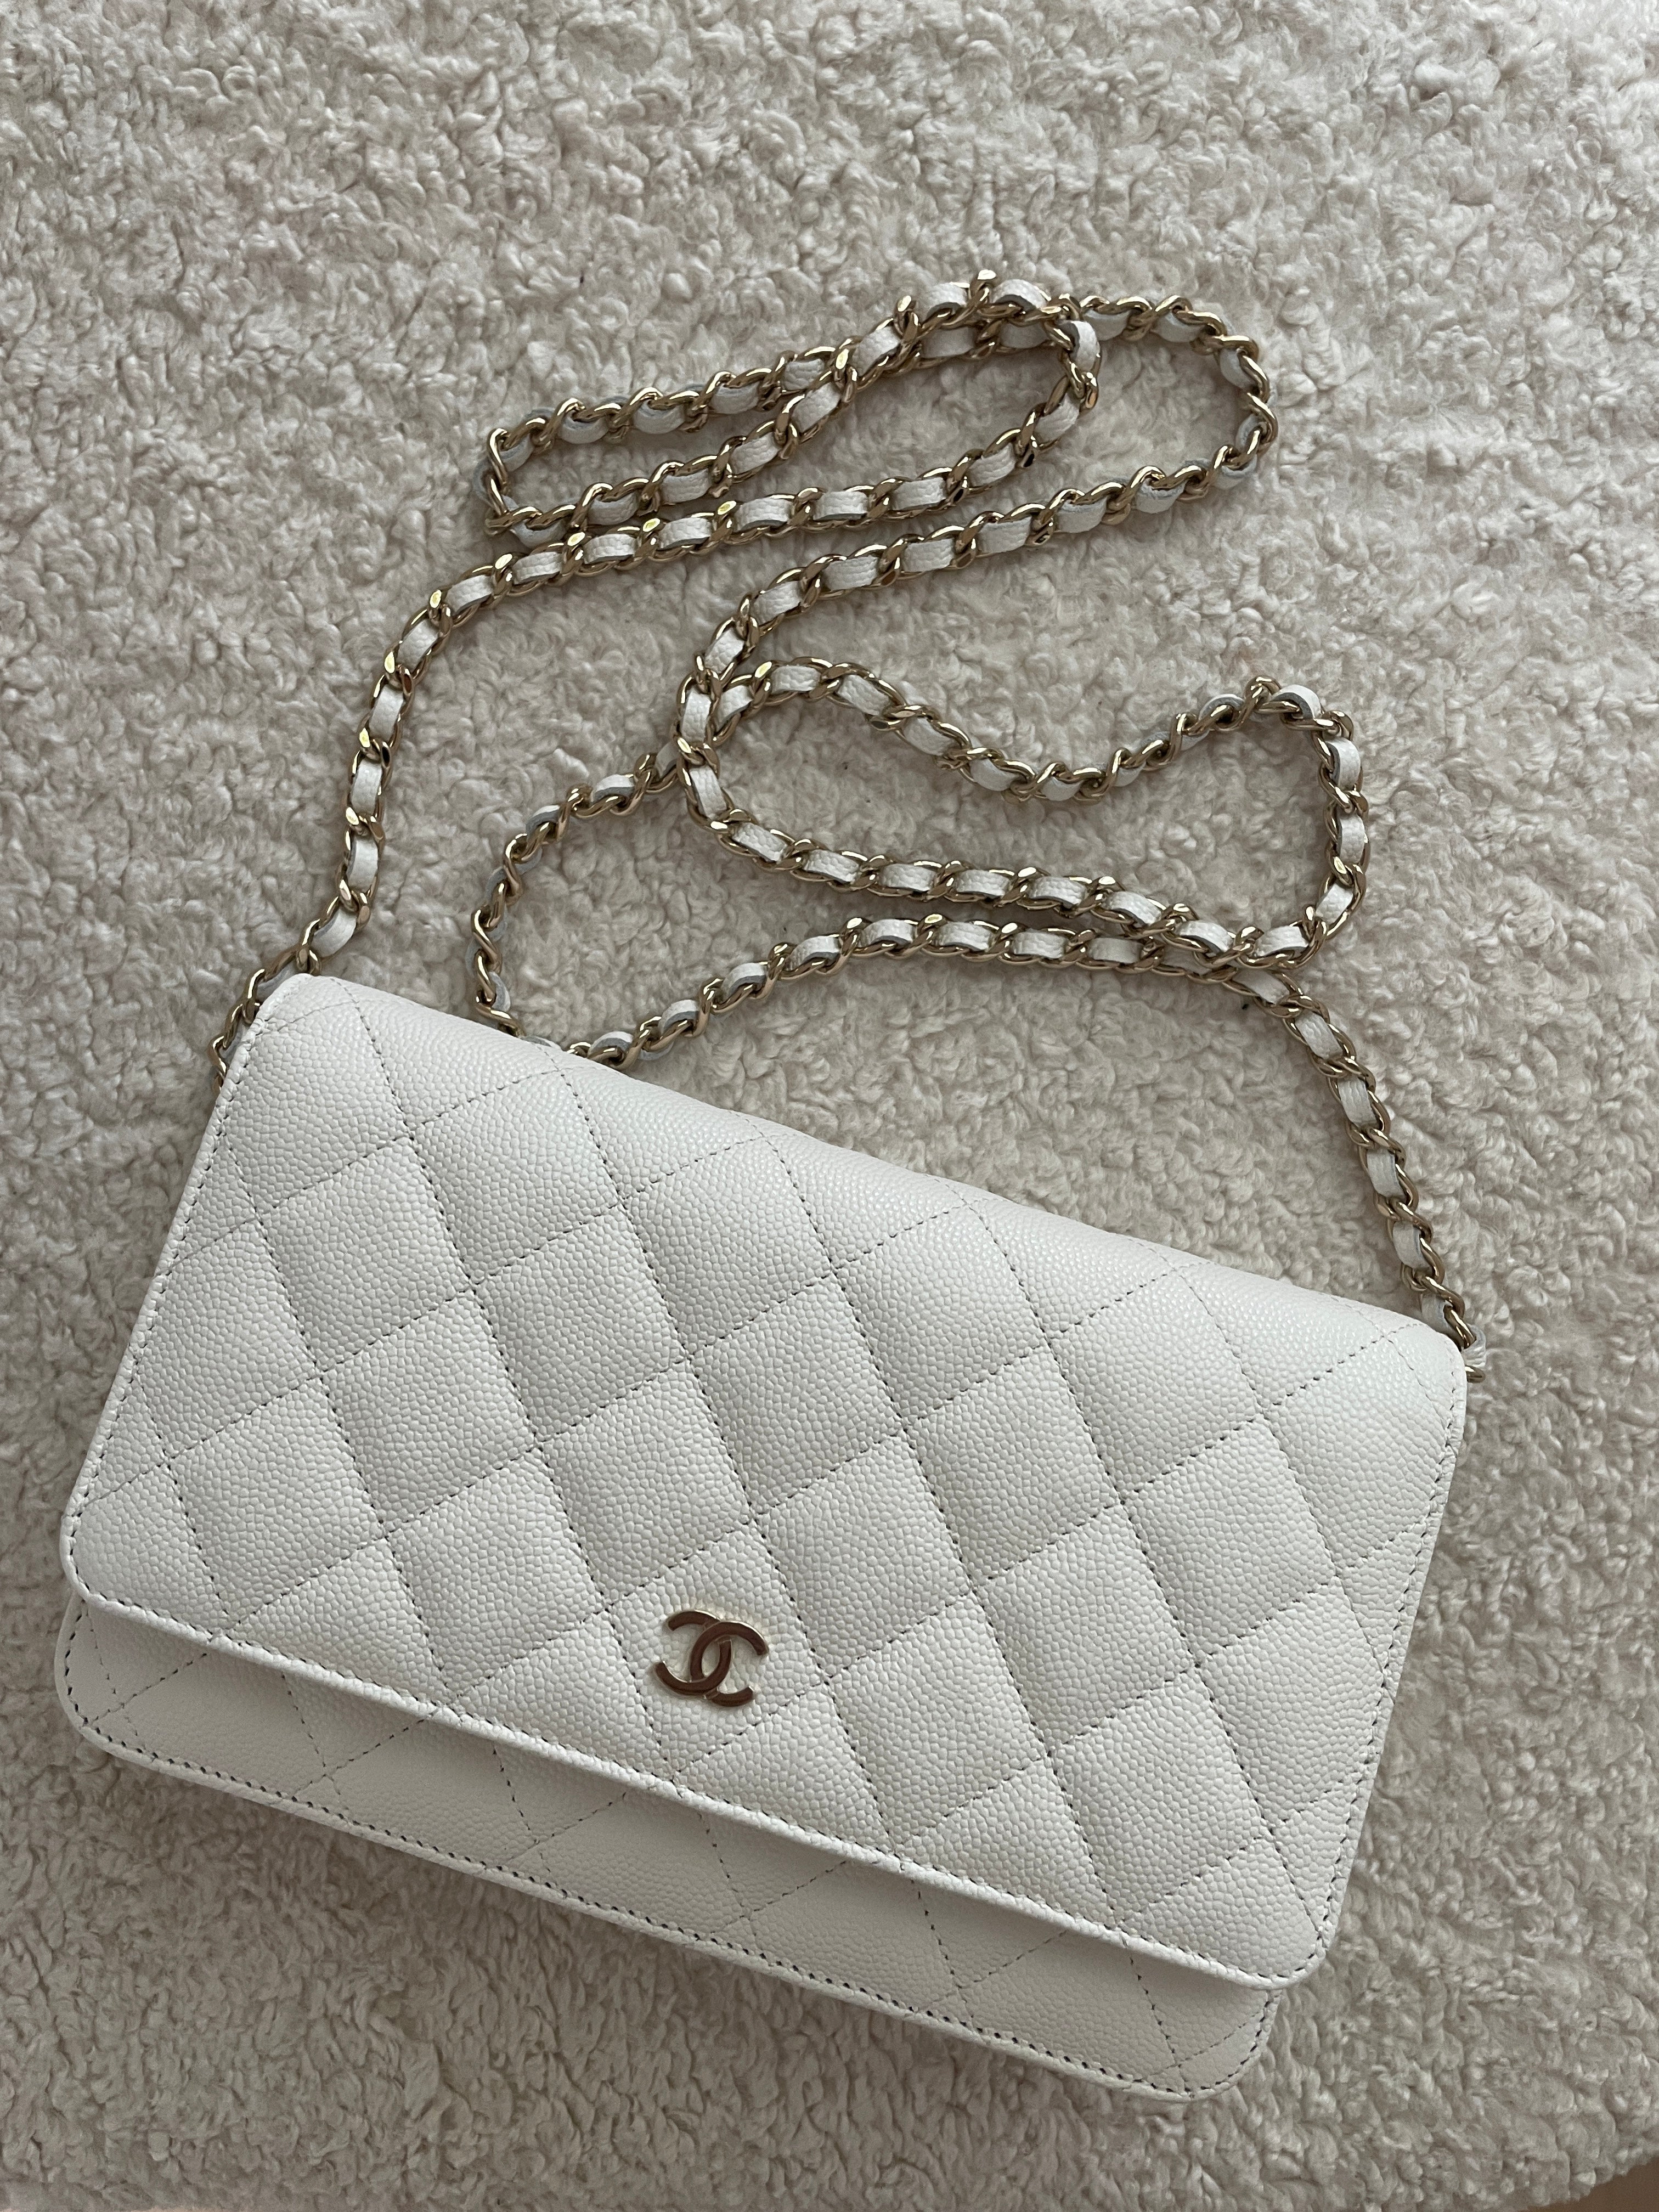 CHANEL Wallet on Chain White Caviar(New RRP £2,810)